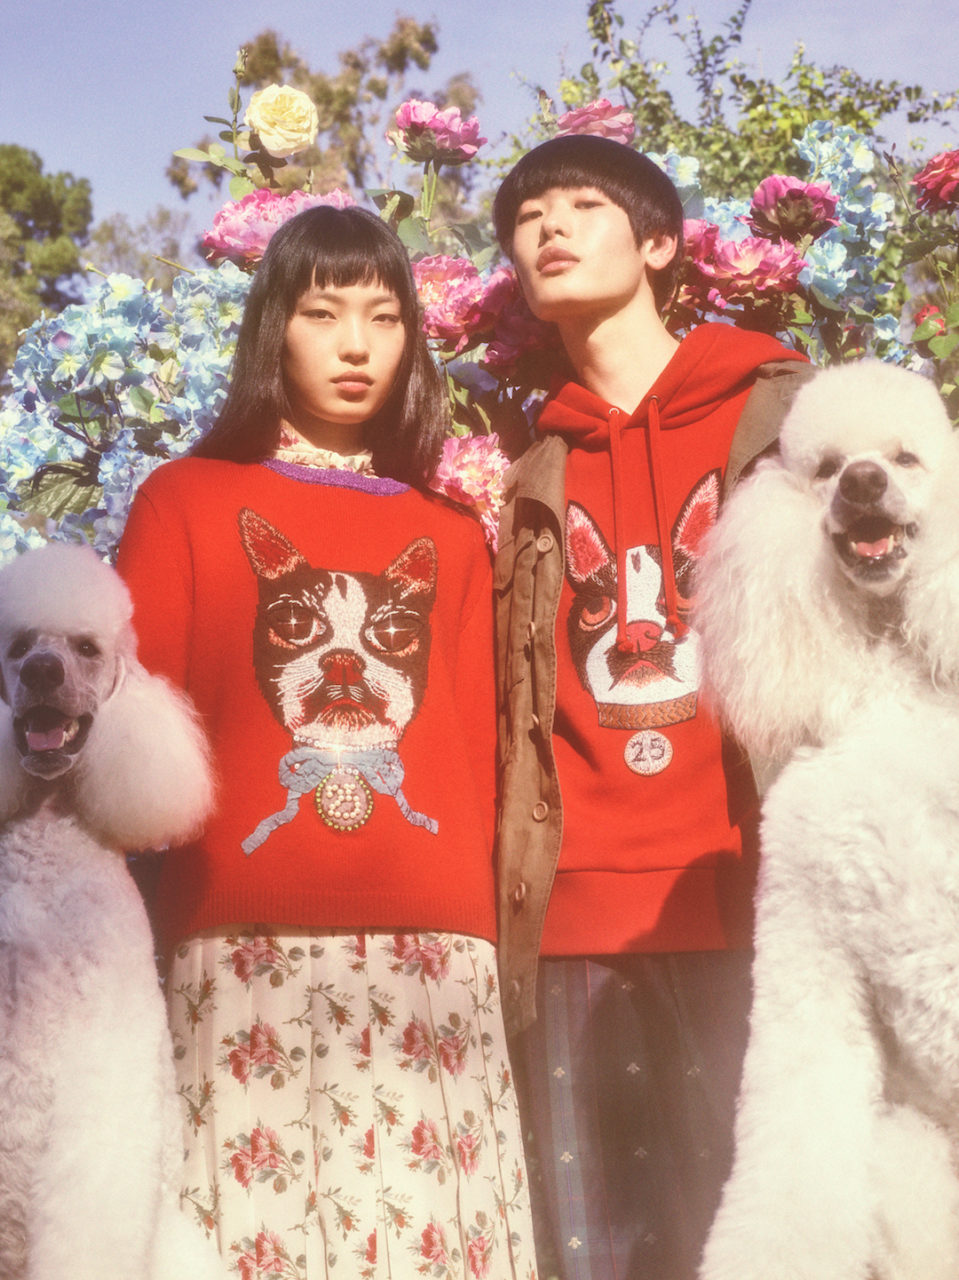 Gucci's capsule collection celebrating the Chinese New Year